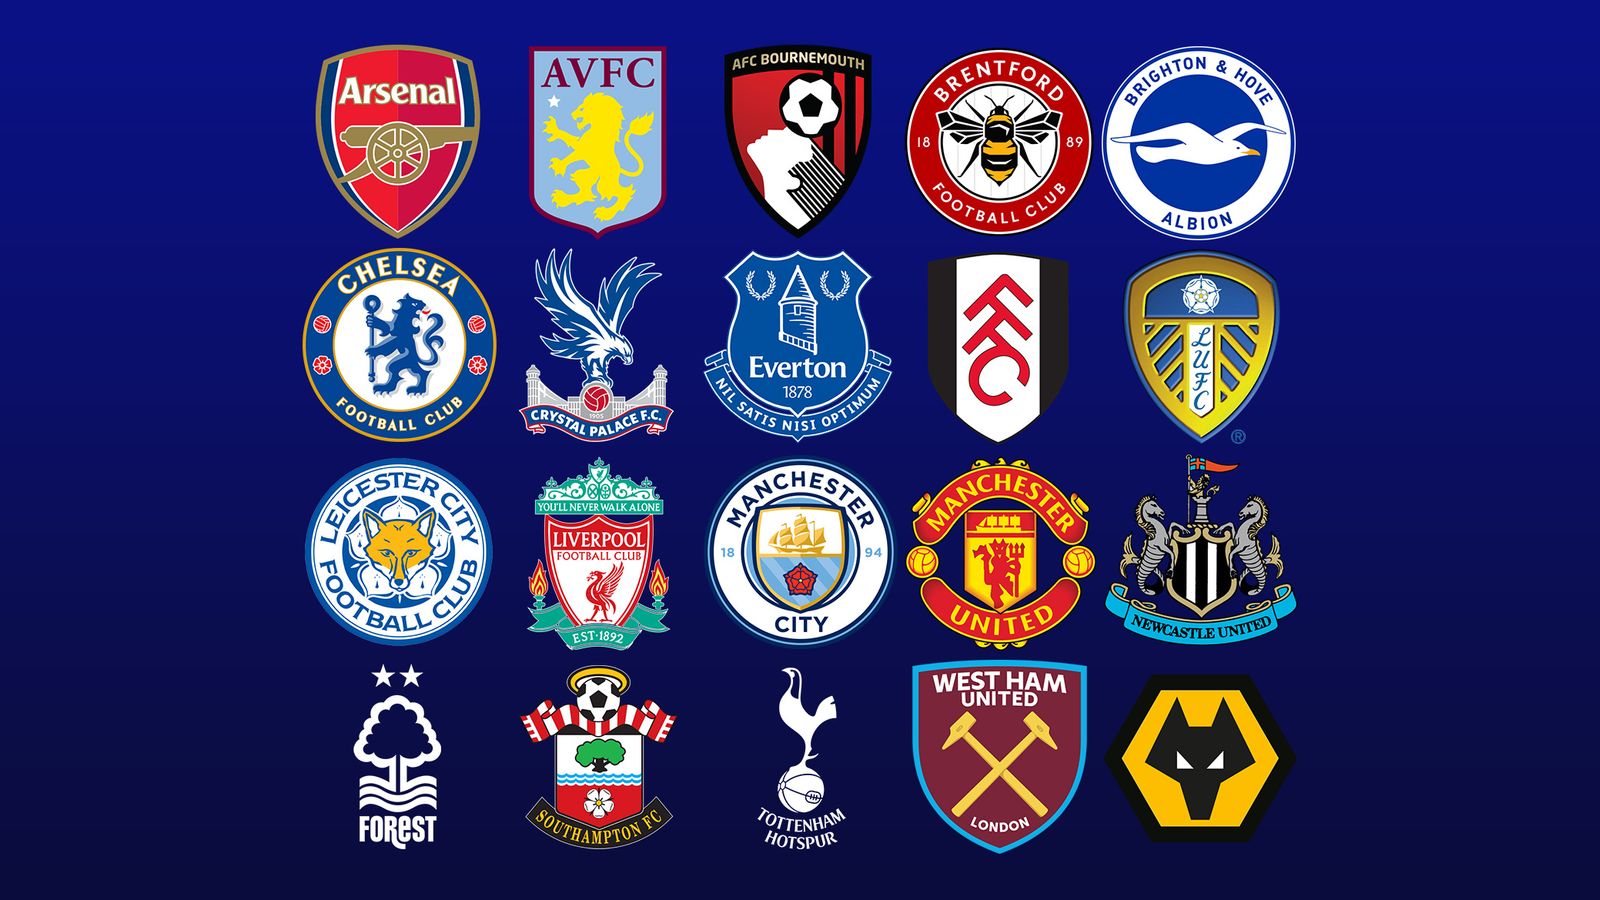 Where every Premier League team needs to strengthen in summer transfer window based on stats